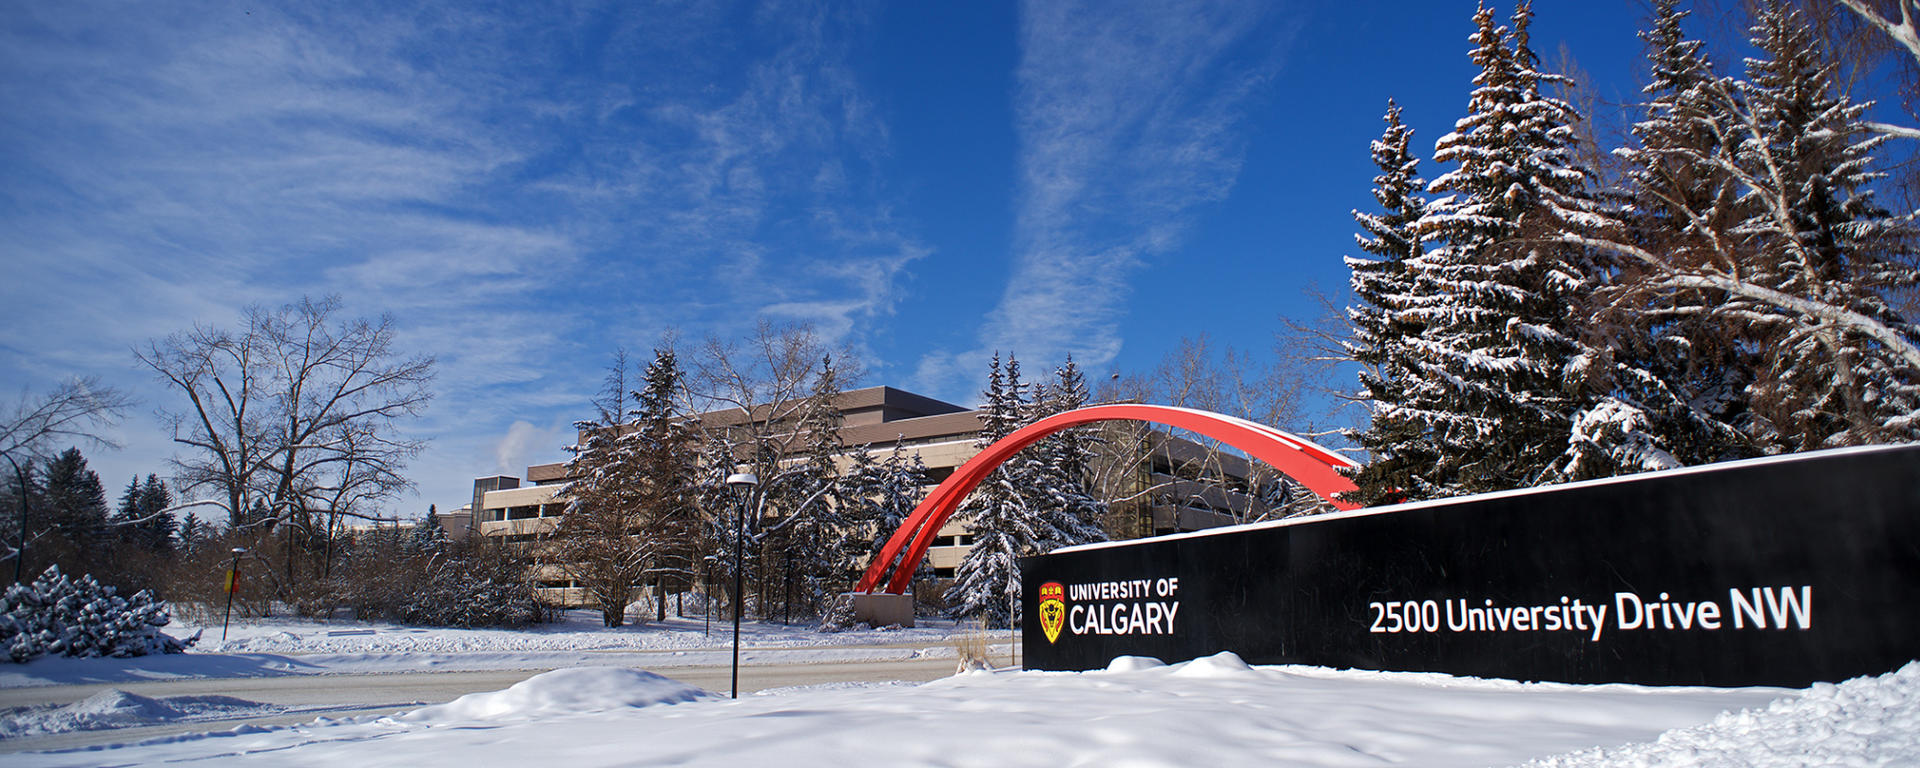 Winter on U of C Main Campus with Large U of C sign and archway in the background